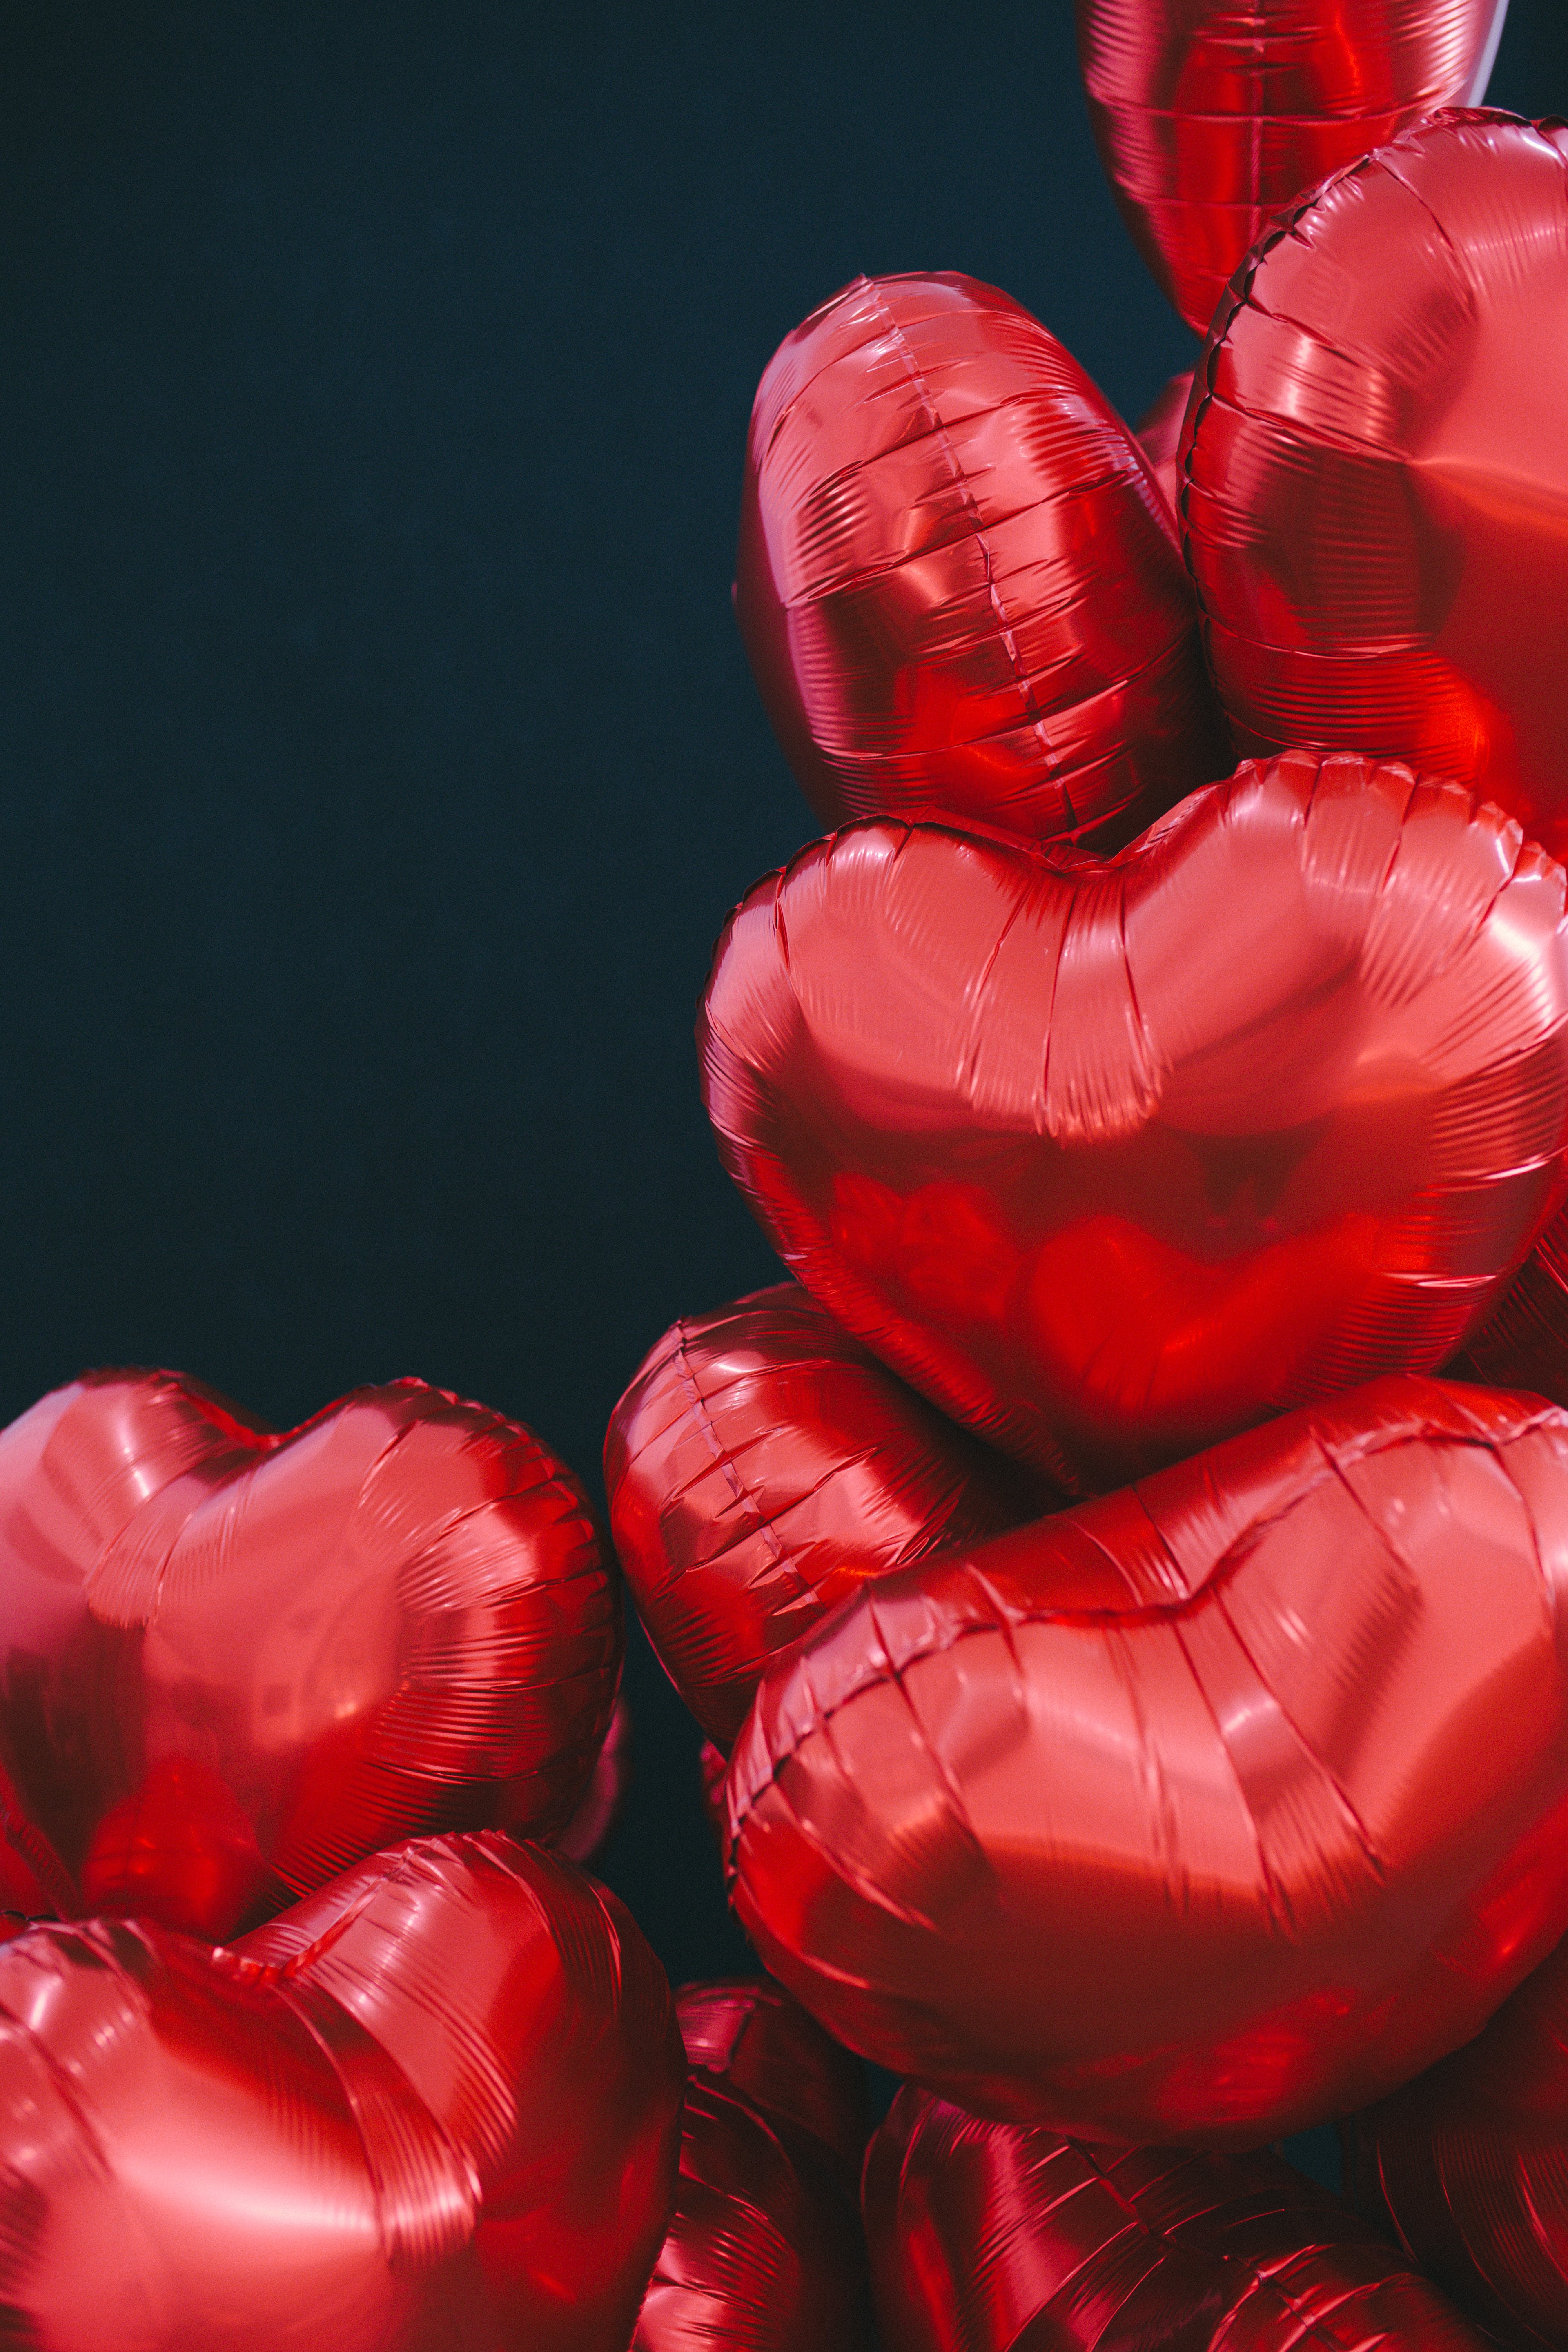 Red Heart Shaped Balloons on Black Background · Free Stock Photo